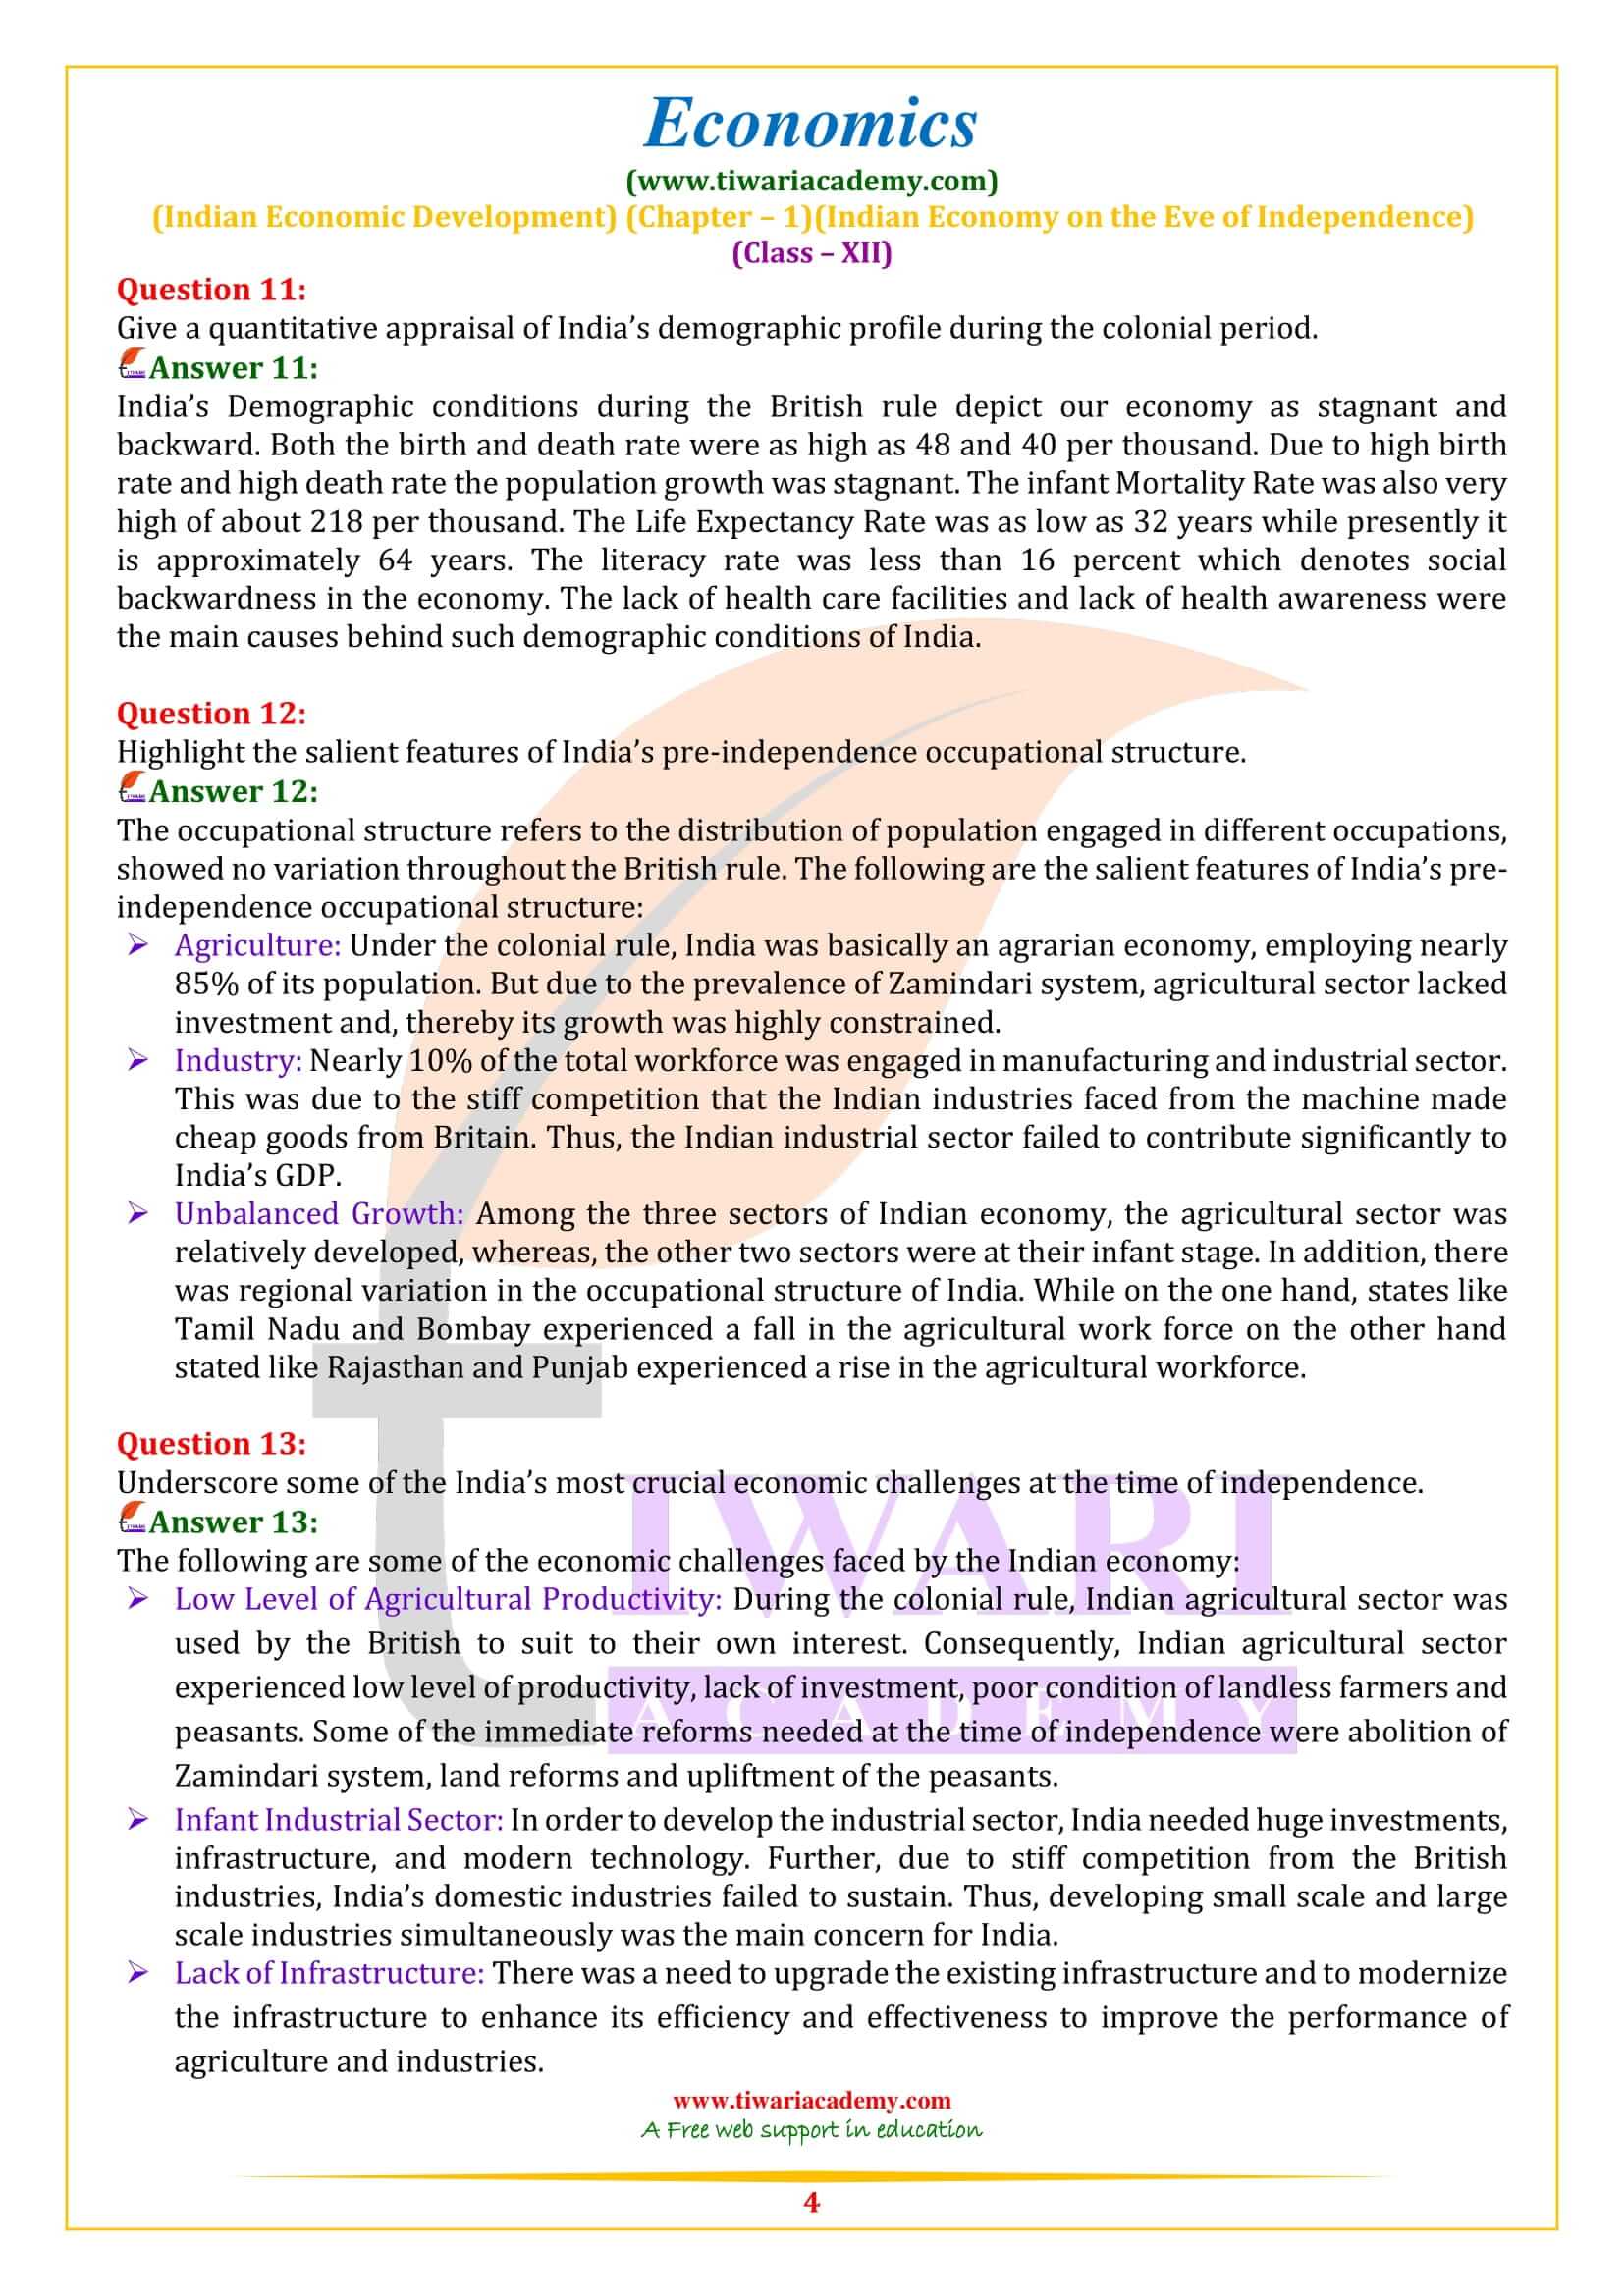 NCERT Solutions for Class 12 Economics Chapter 1